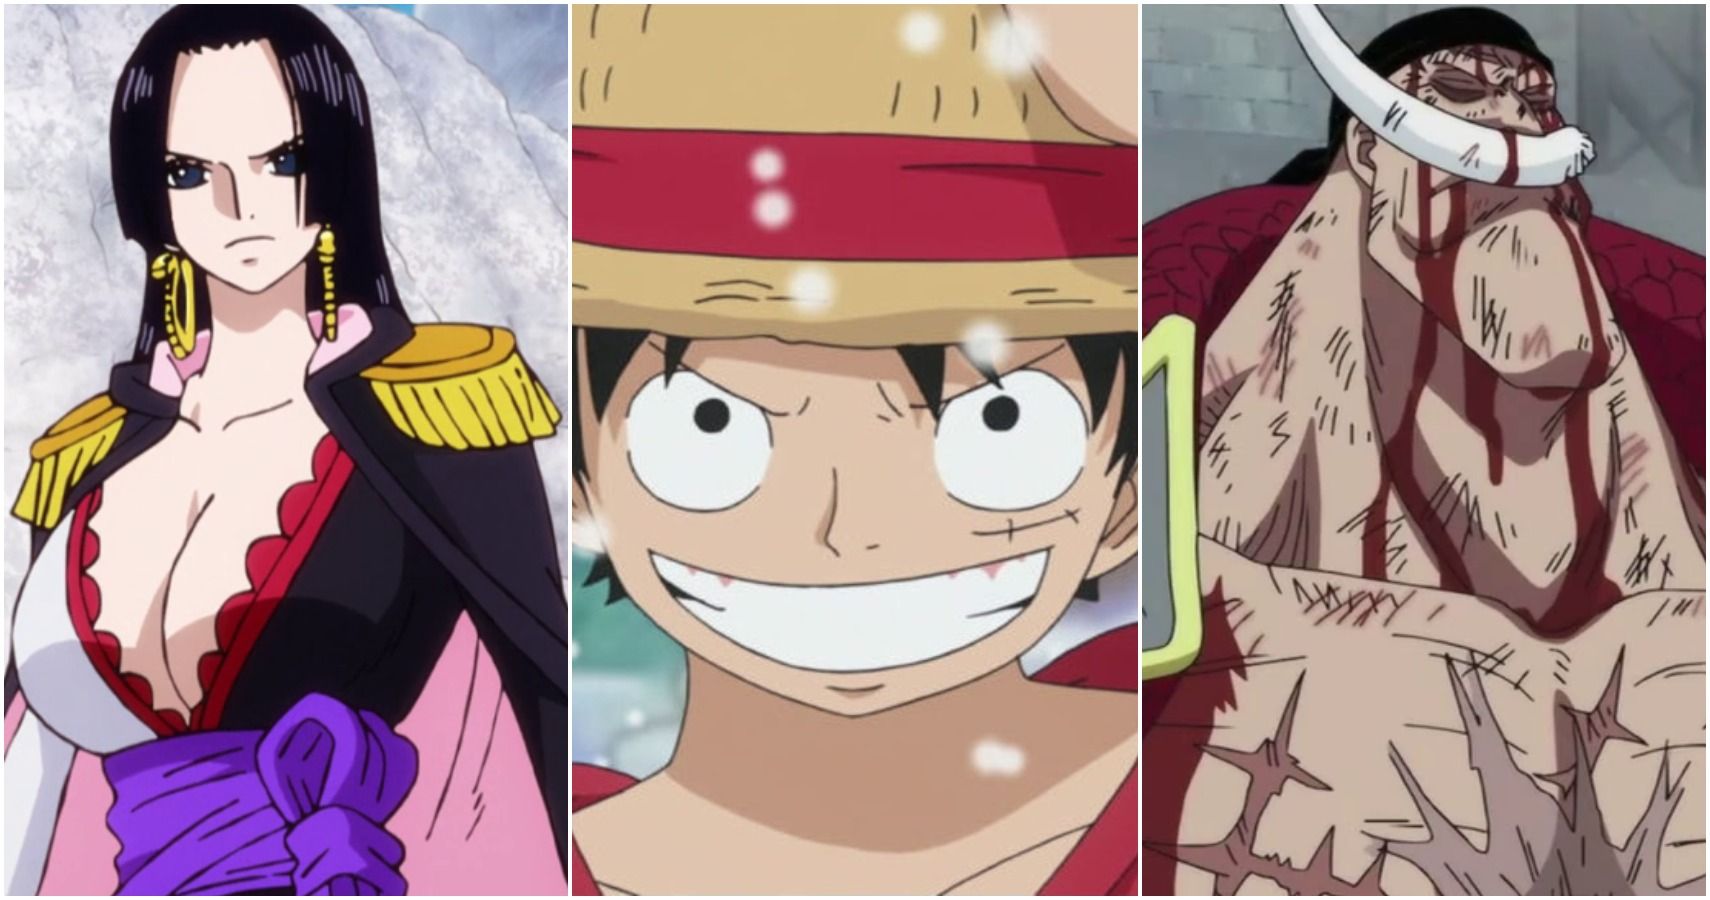 How do we know when the Great Pirate Era began in One Piece? - Quora